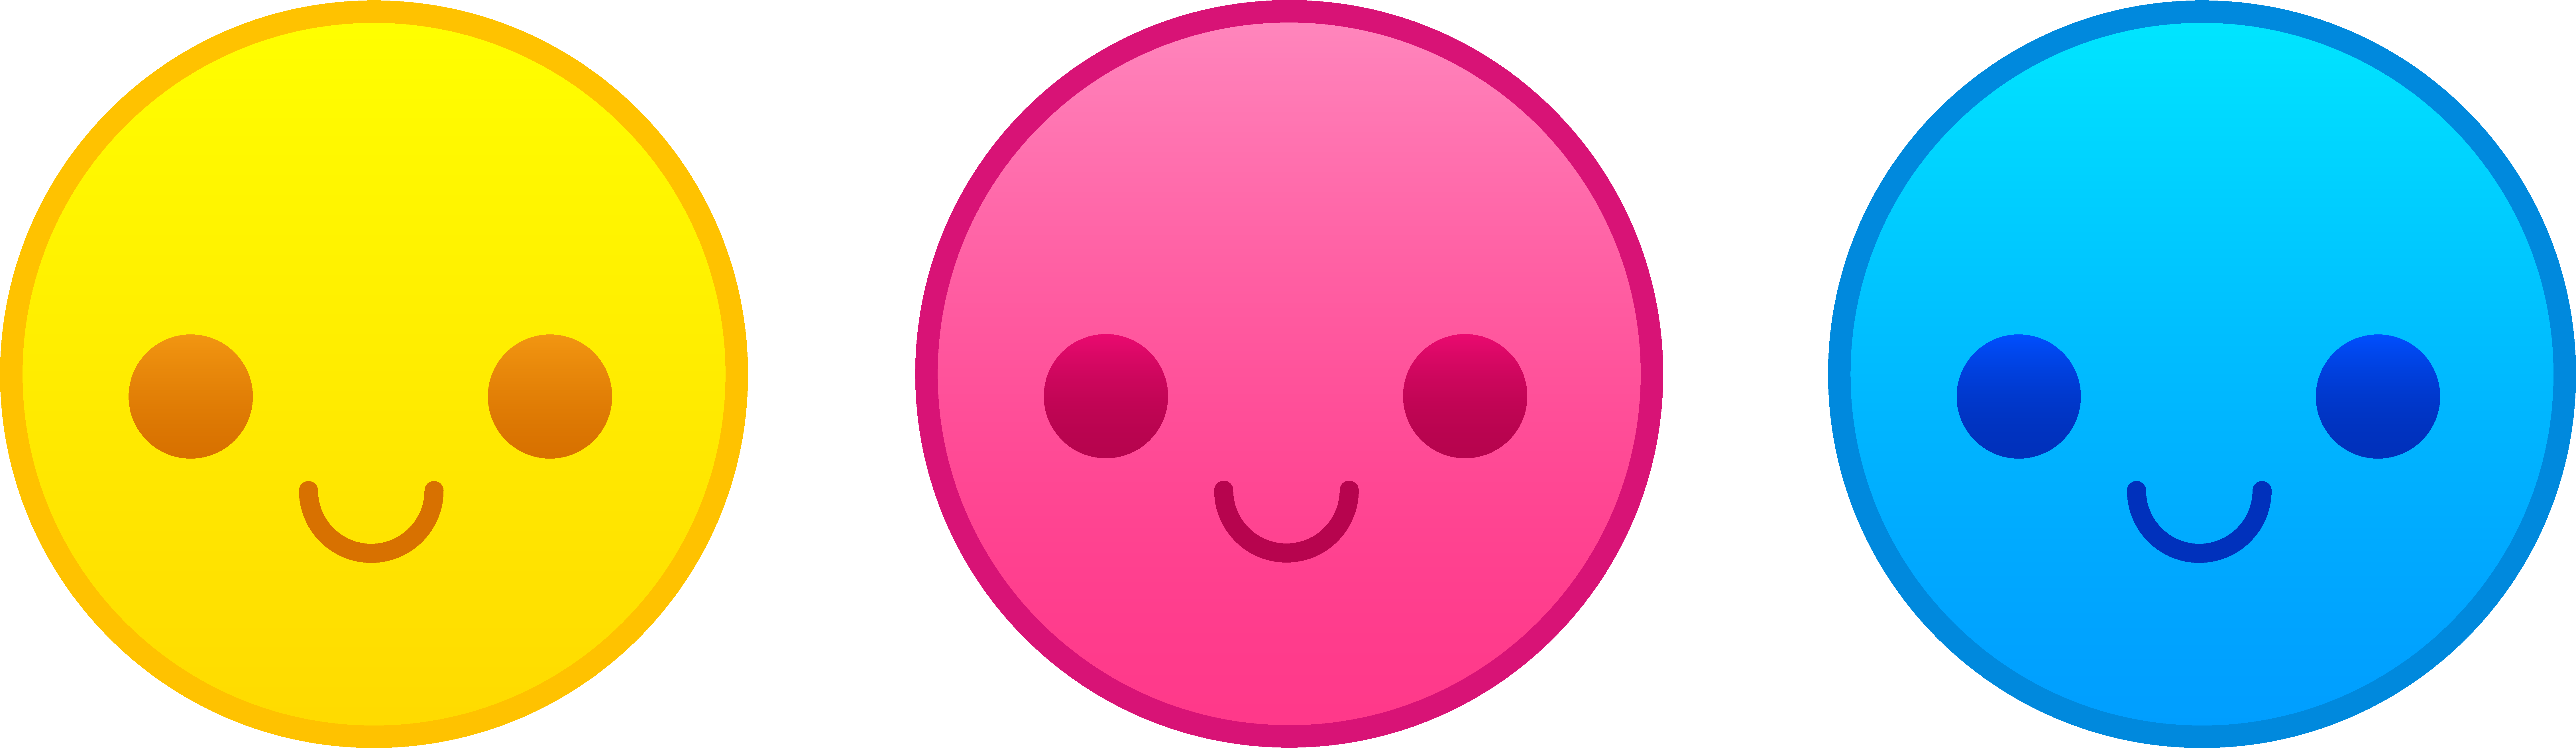 Images For > Pink Smiley Face Backgrounds